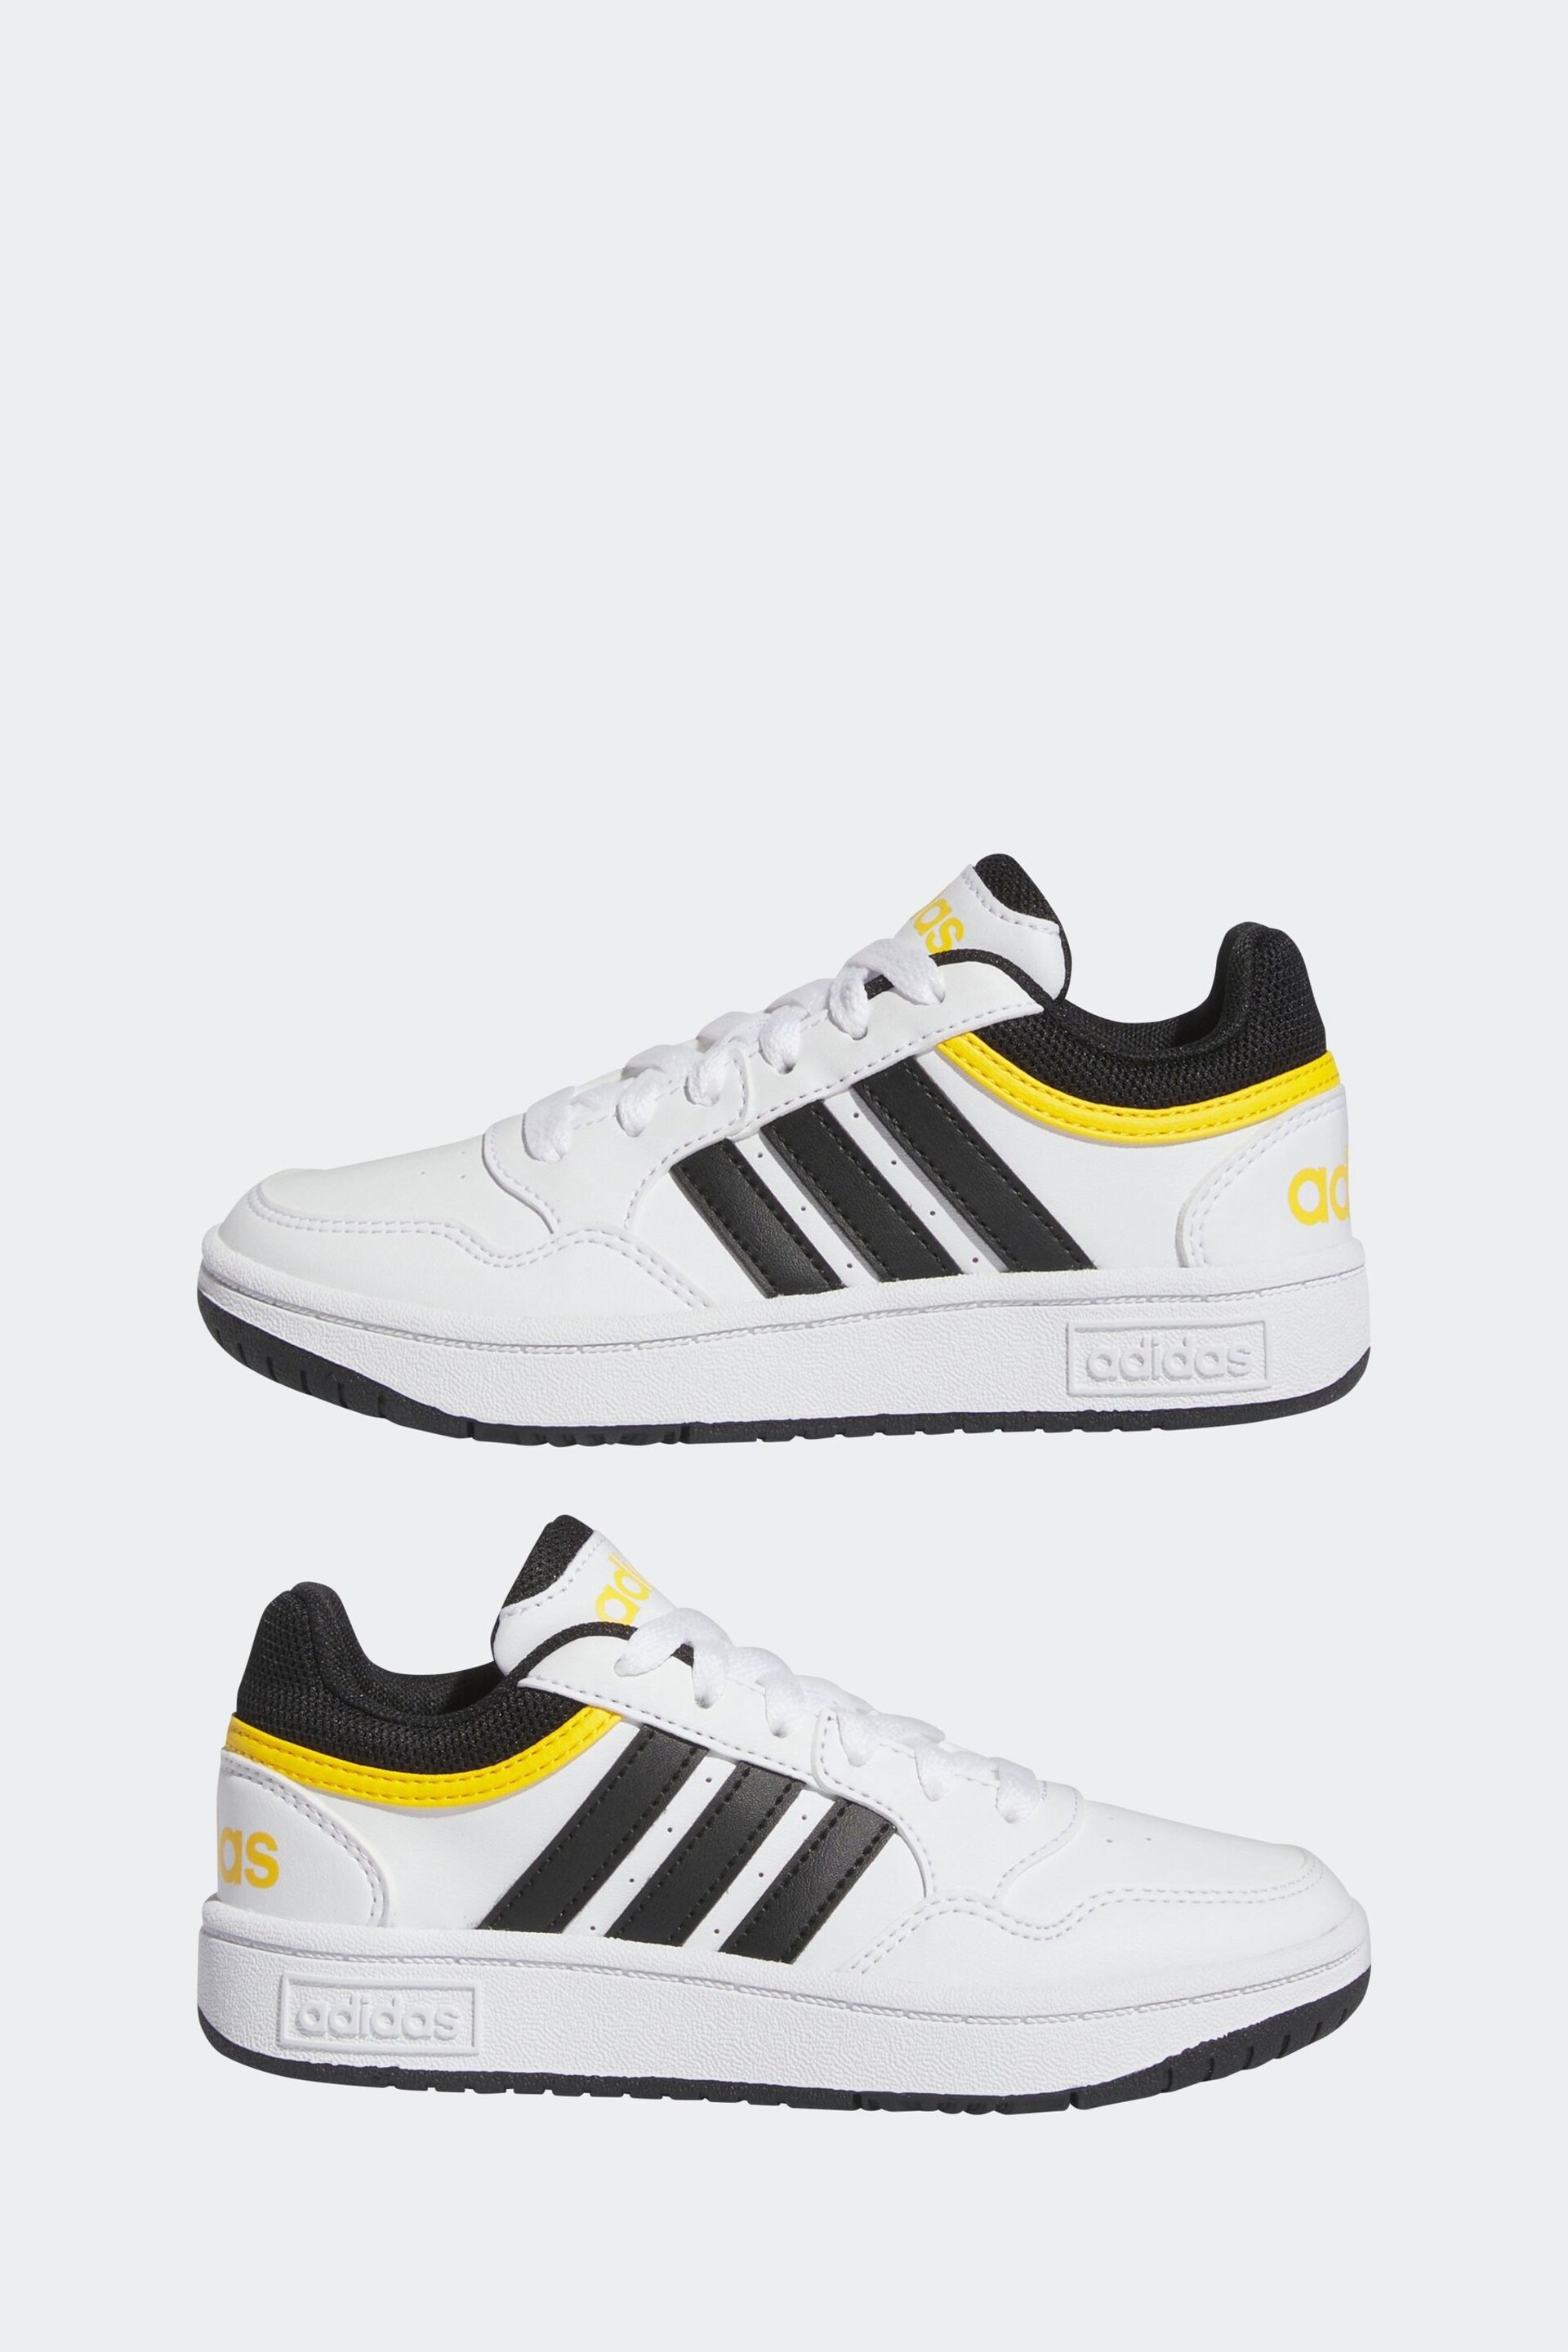 adidas Yellow/Black Hoops Trainers - Image 5 of 8